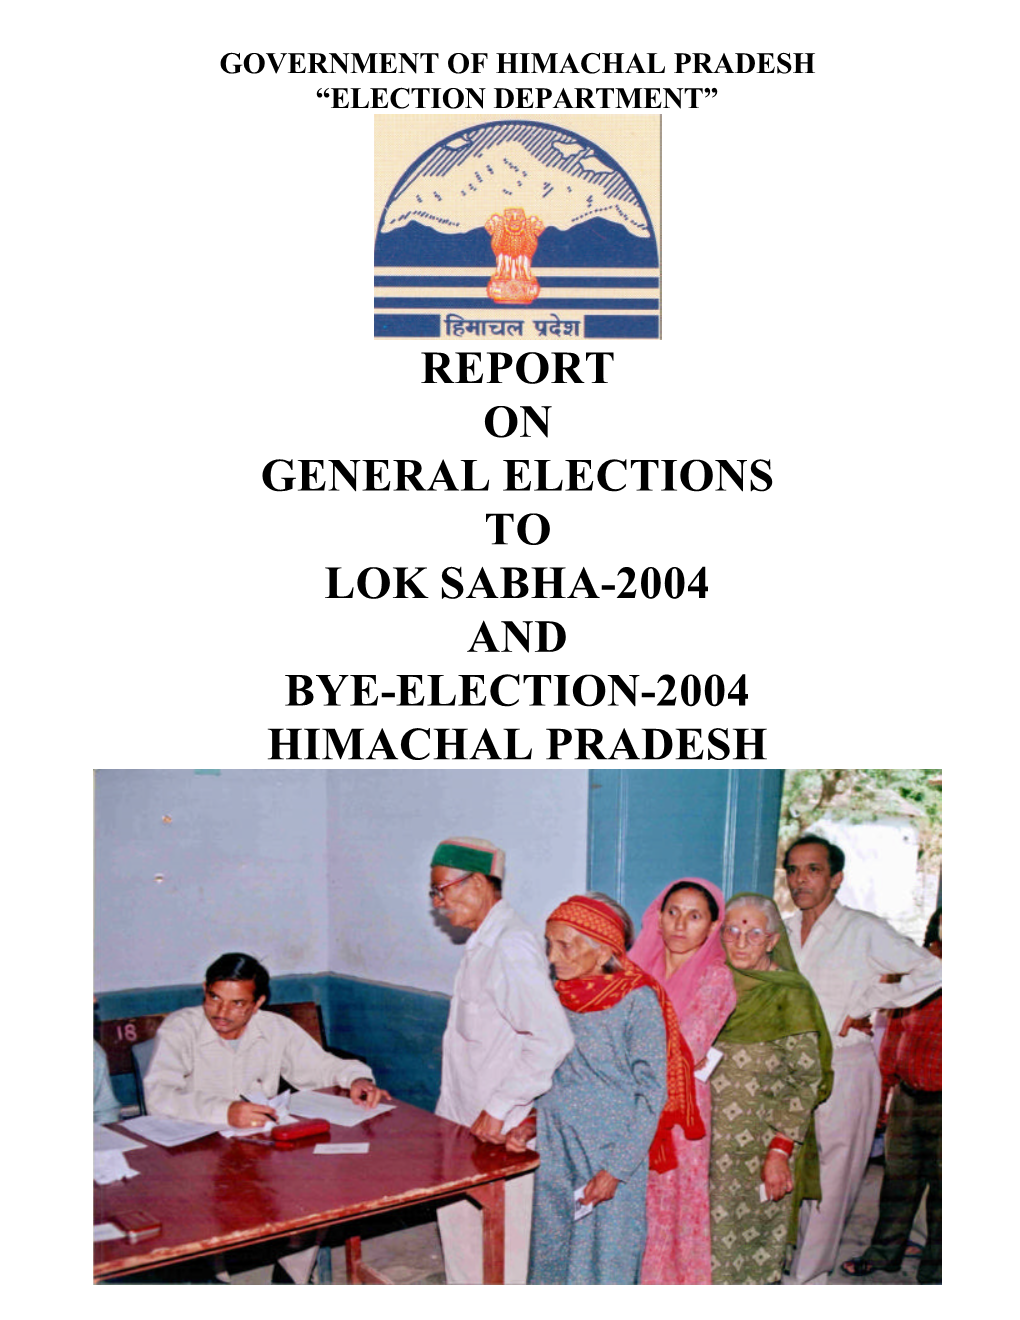 Report of General Elections to Lok Sabha-2004 and Bye-Election-2004